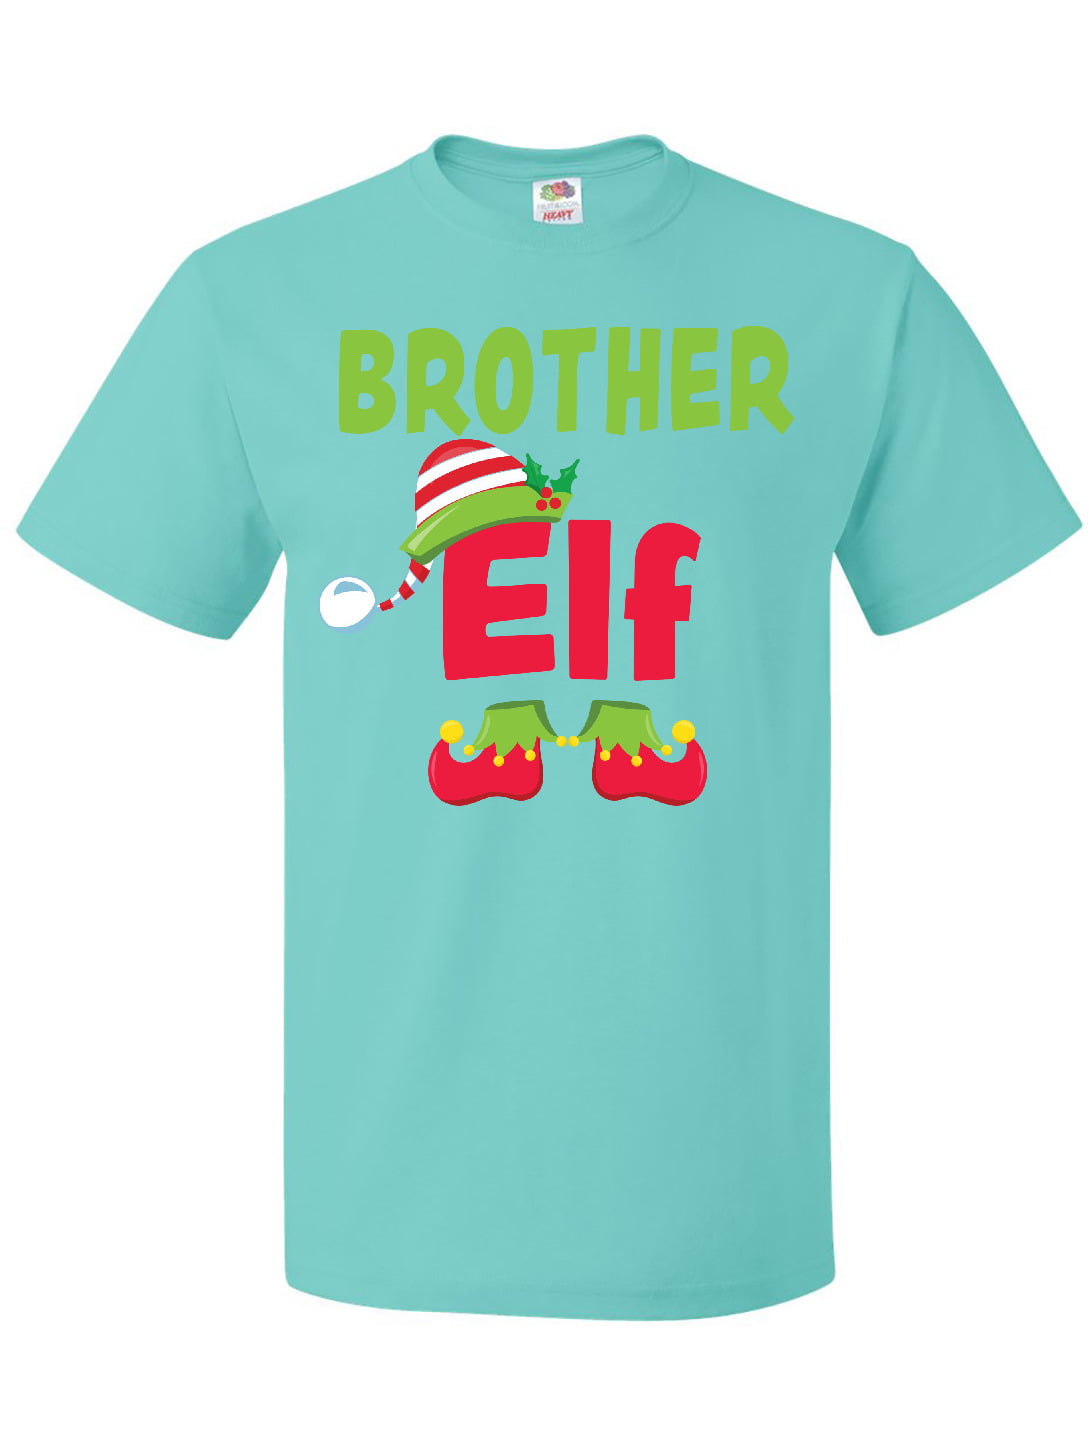 inktastic This Little Elf is Gonna Be a Sister Toddler T-Shirt